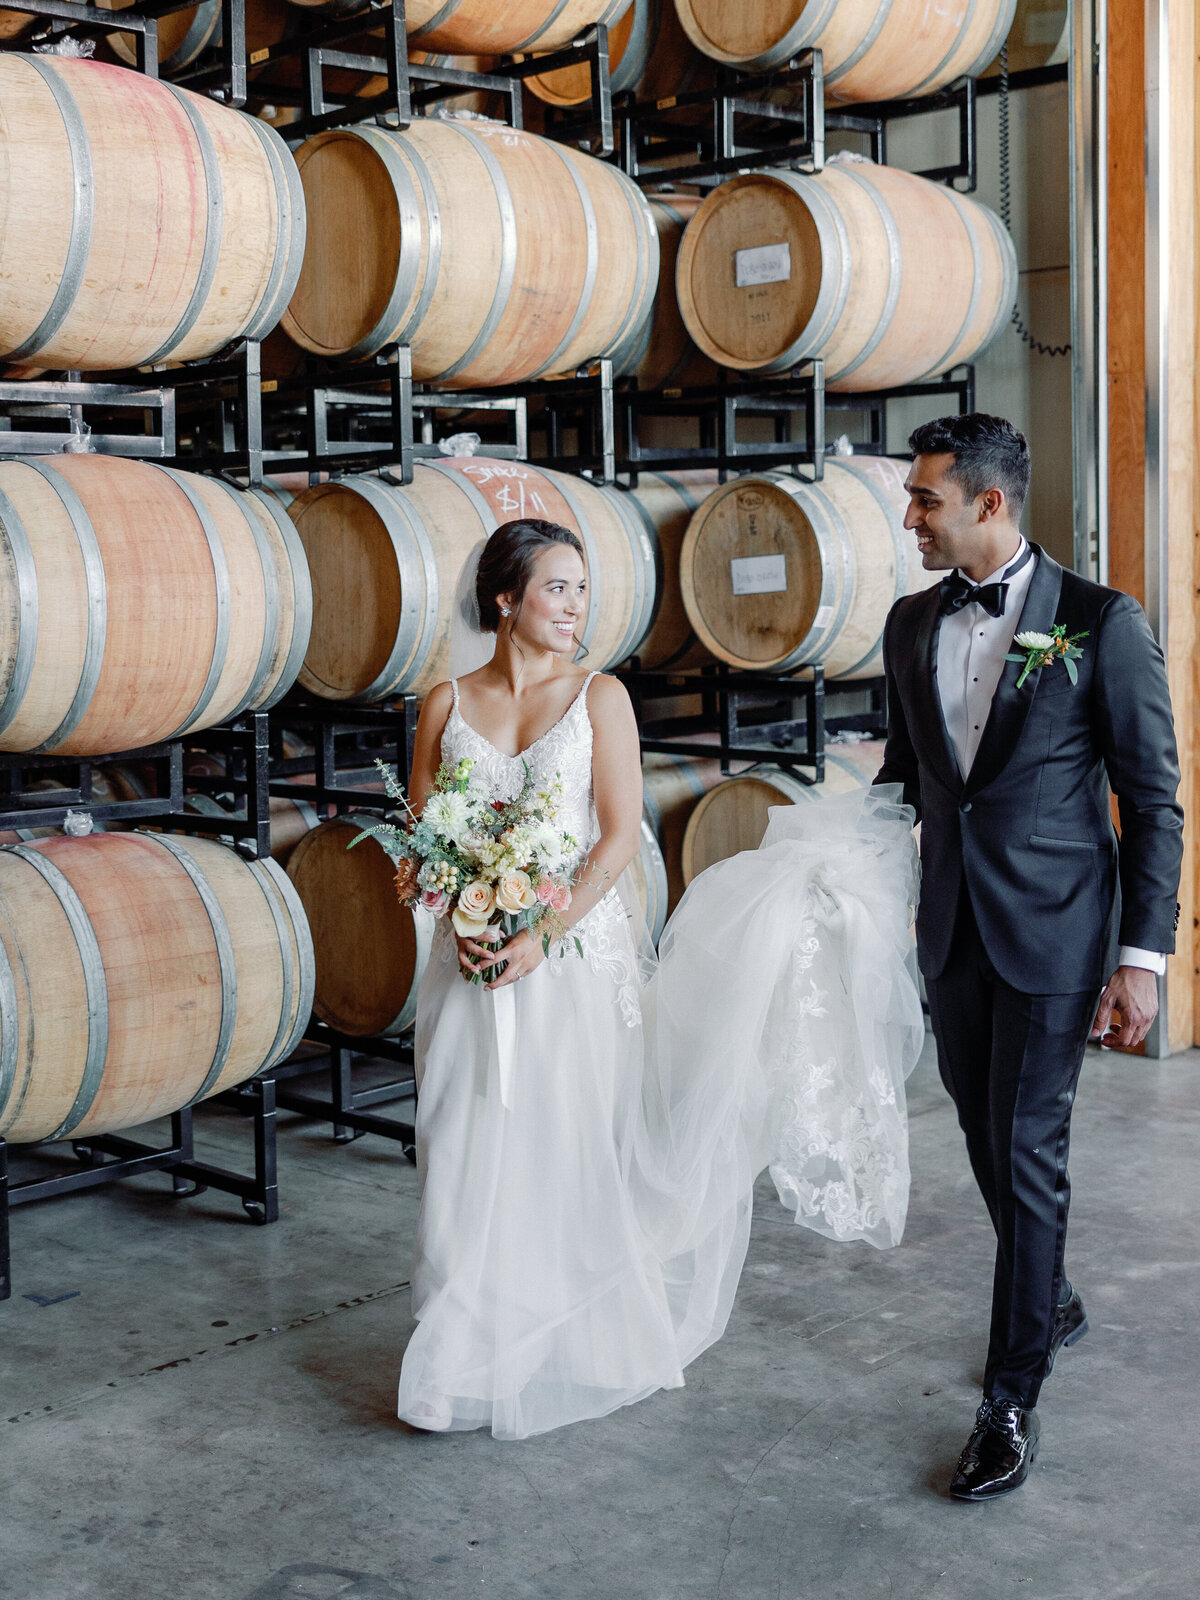 A bride and groom walk together in the wine cellar of district winery while the groom holds his bride's dress train and she looks back at him lovingly